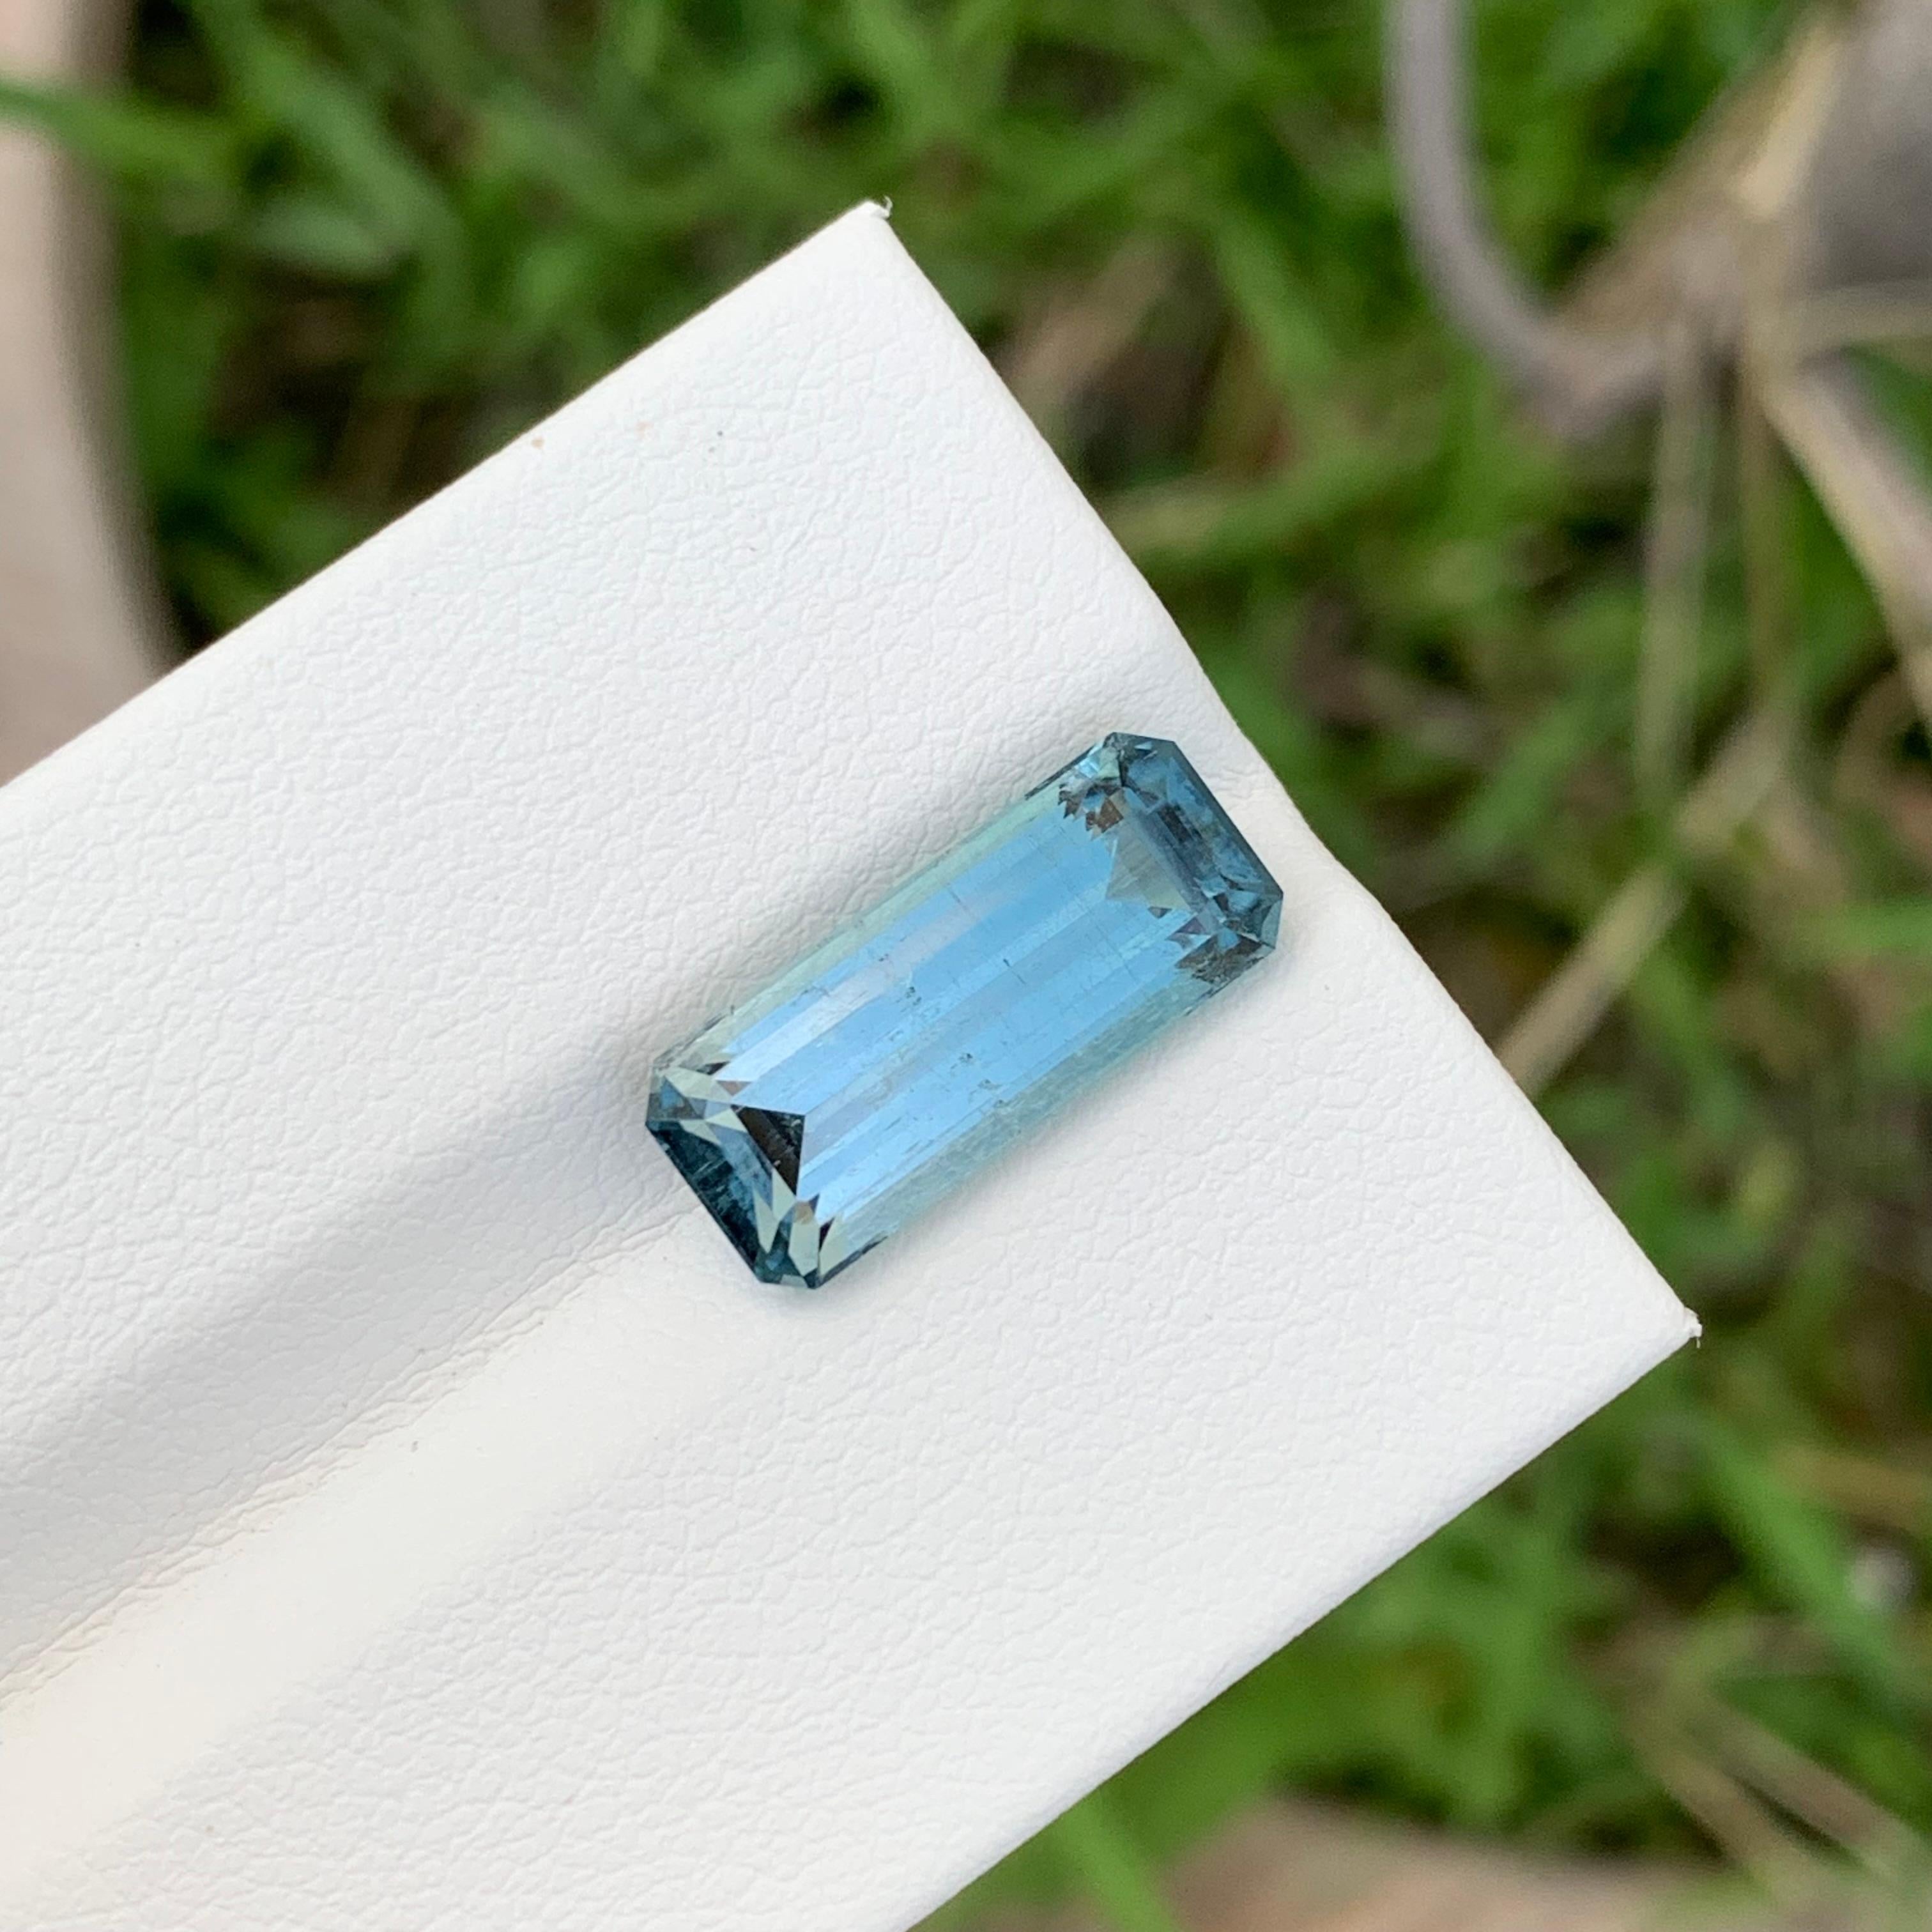 Loose Blue Seafoam Tourmaline

Weight: 5.05 Carats
Dimension: 15.5 x 6.5 x 5.6 Mm
Colour: Blue Seafoam 
Origin: Afghanistan
Certificate: On Demand
Treatment: Non

Tourmaline is a captivating gemstone known for its remarkable variety of colors,